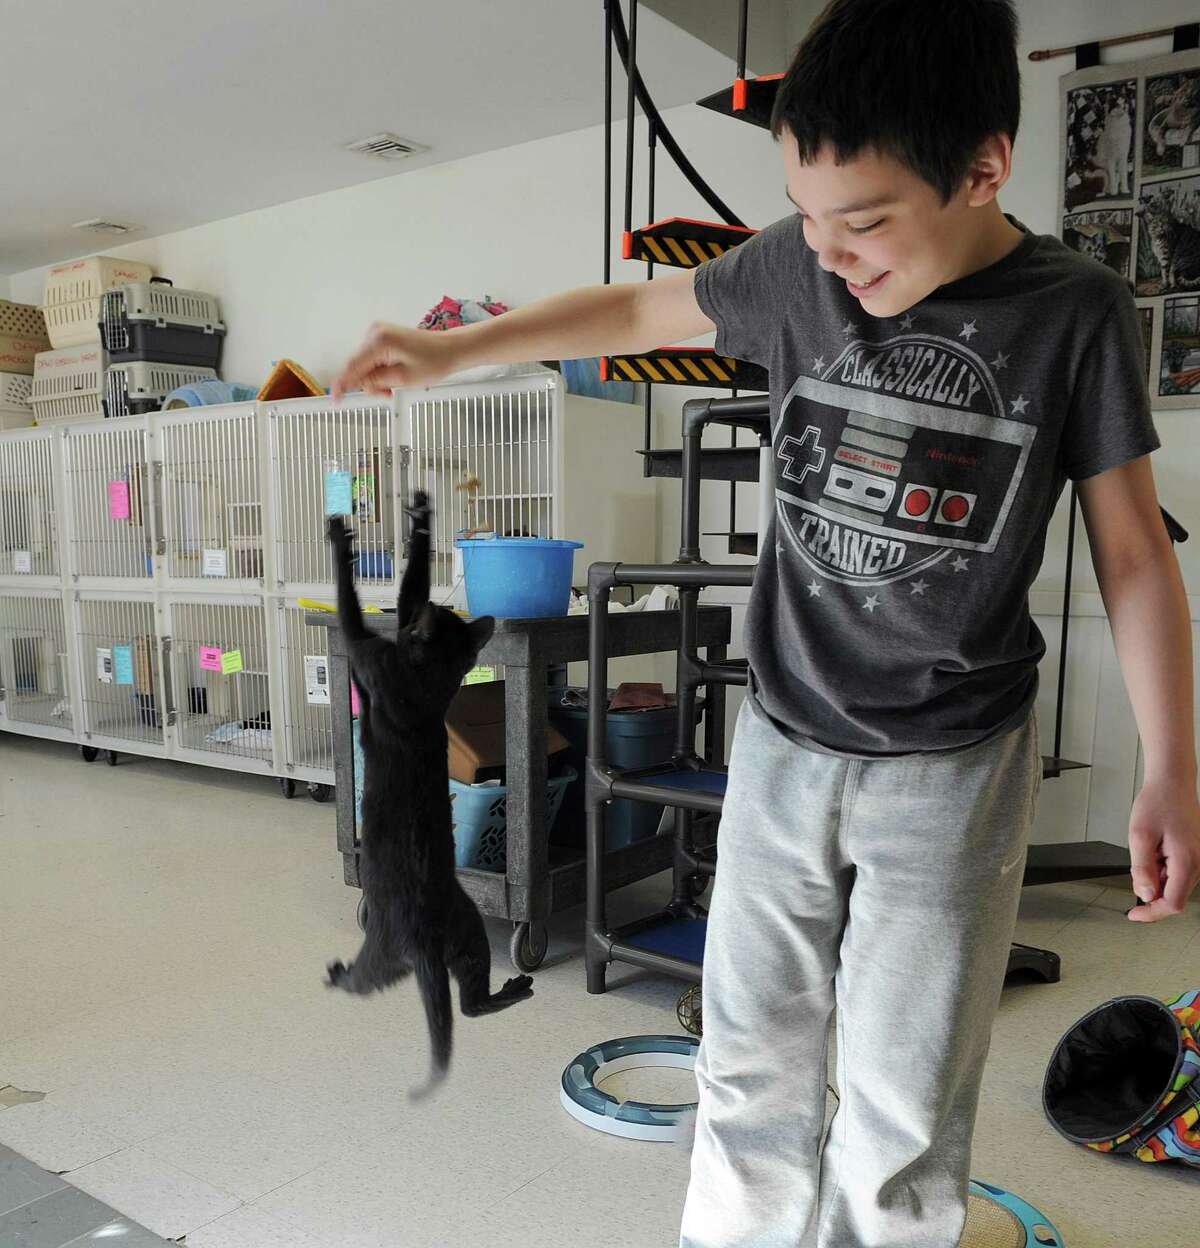 Tyler Grace, 11, plays with a kitten at Danbury Animal Welfare, Monday, March 6, 2017. Fairfield County Giving Day is Thursday, March 9 and the Danbury Animal Welfare Society is one of the participants.